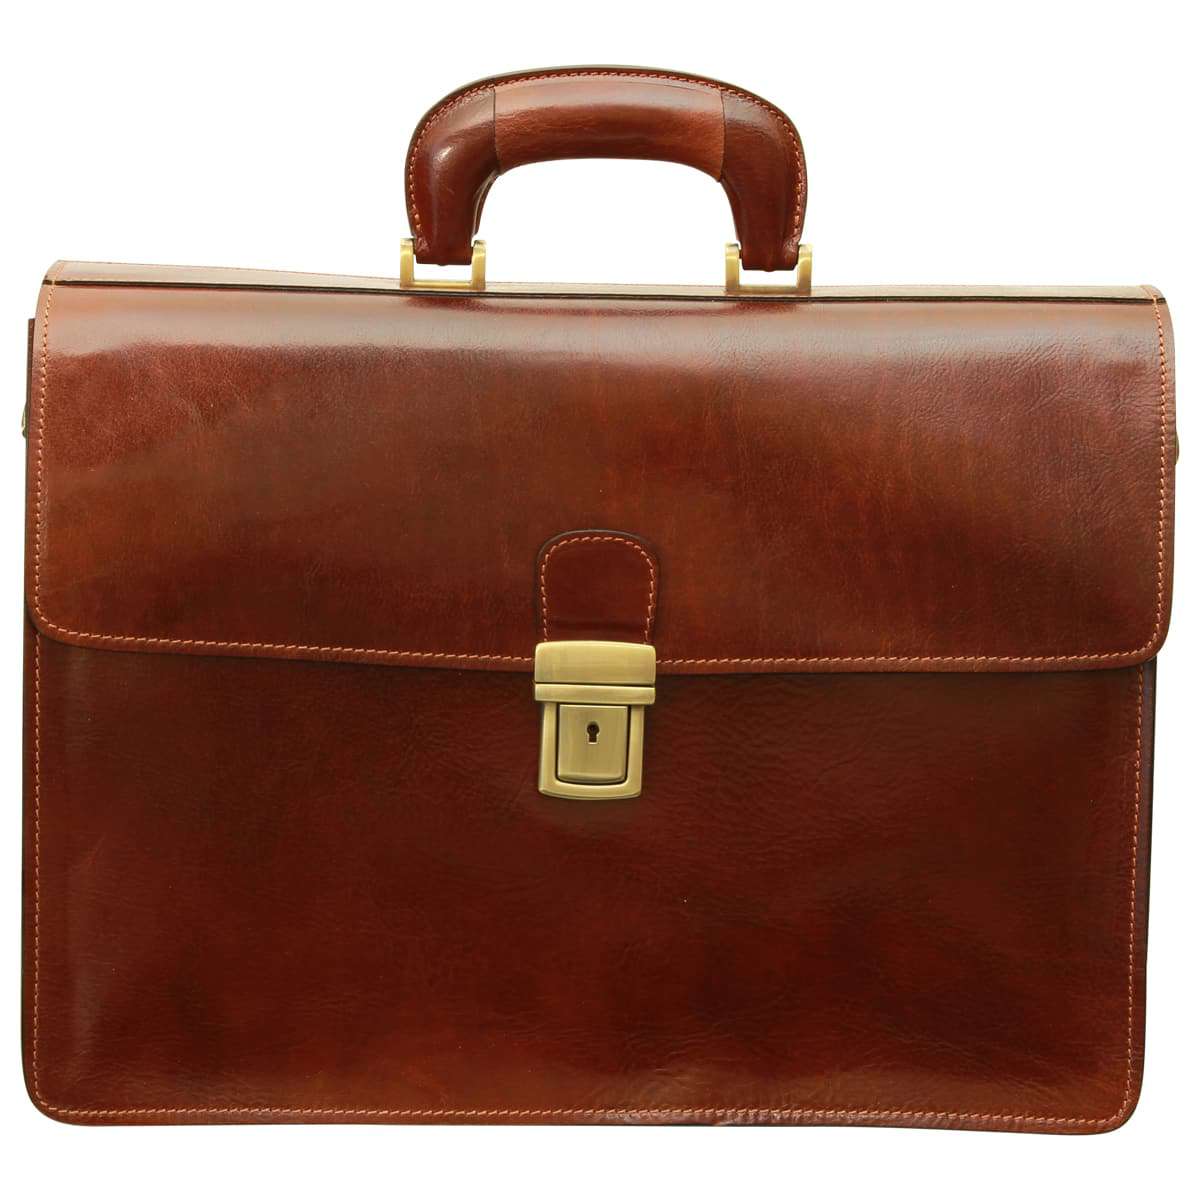 Leather Briefcase with secure clip closure - Brown | 077905MA UK | Old Angler Firenze